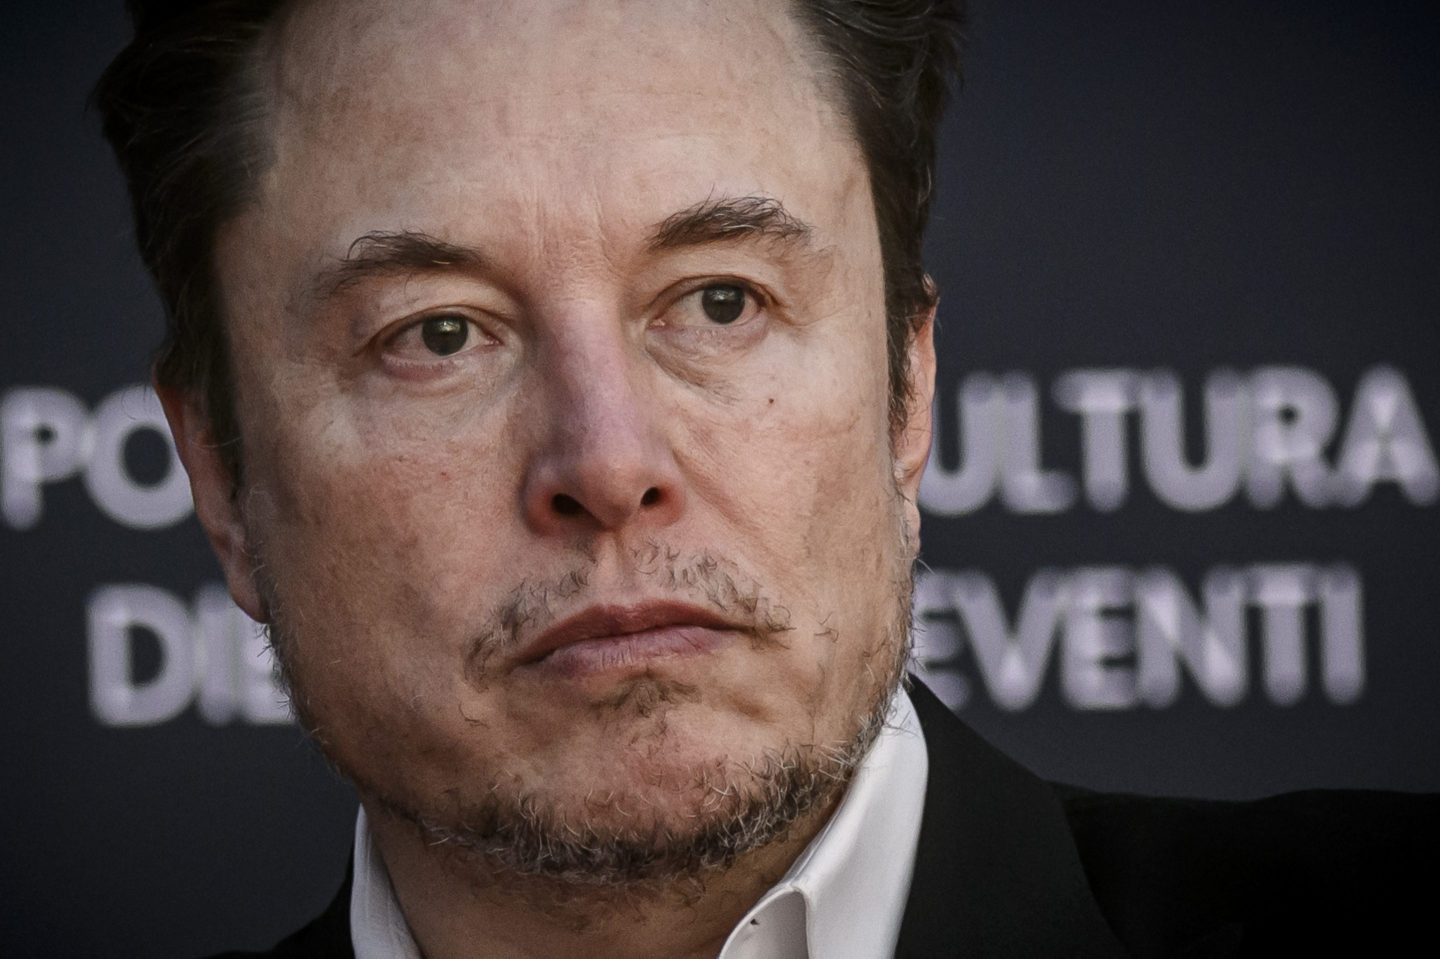 ROME, ITALY &#8211; DECEMBER 15: Elon Musk, chief executive officer of Tesla Inc and X (formerly Twitter) Ceo speaks at the Atreju political convention organized by militants of Fratelli d&#8217;Italia (Brothers of Italy), on December 15, 2023 in Rome, Italy. Italian Prime Minister Giorgia Meloni&#8217;s right-wing political party organised a four-day political festival in the Italian capital. (Photo by Antonio Masiello/Getty Images)